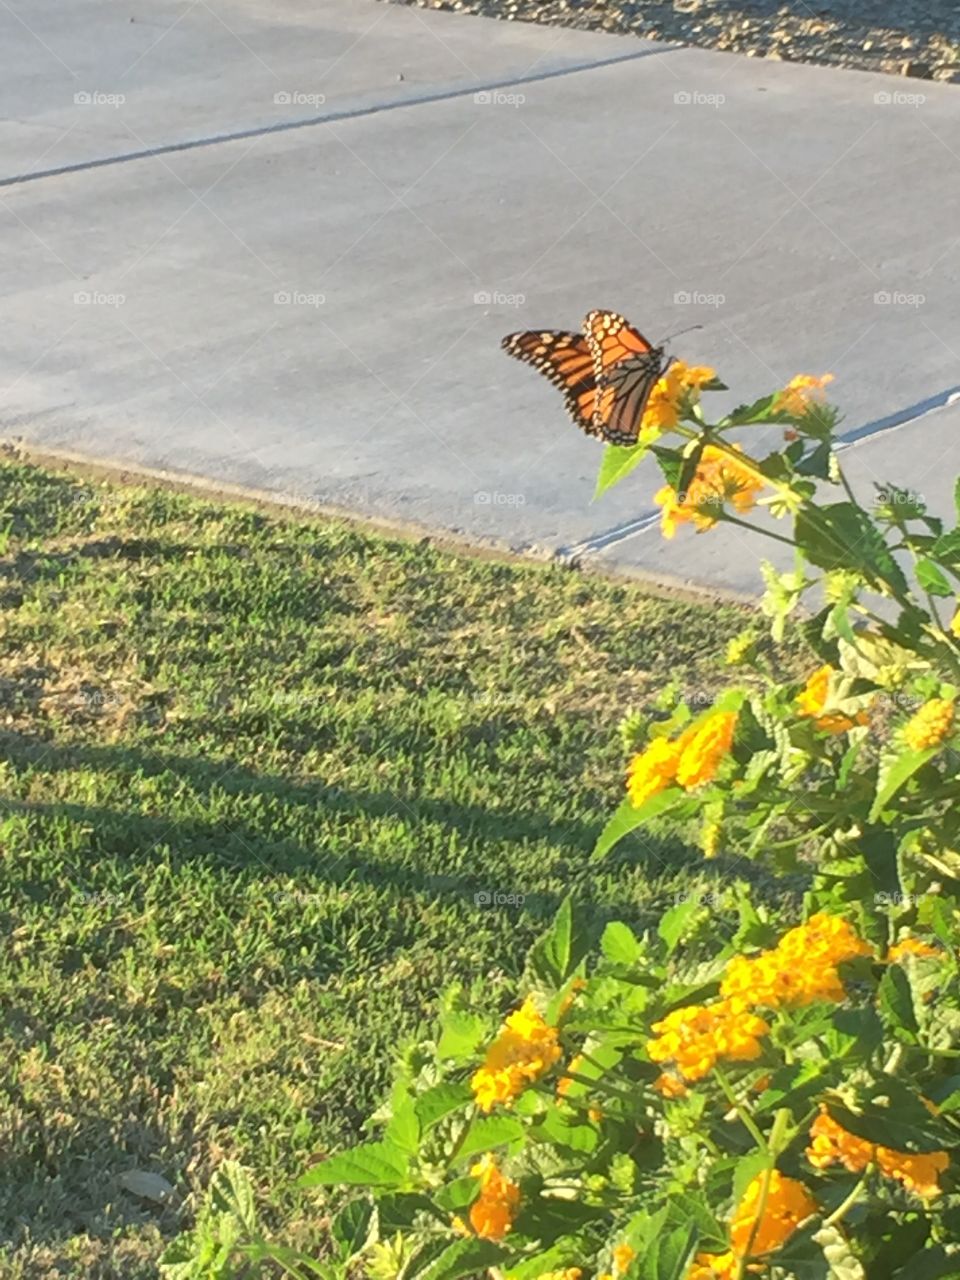 A monarch butterfly lands on a common flower in Eastmark's Orange Monster Park.